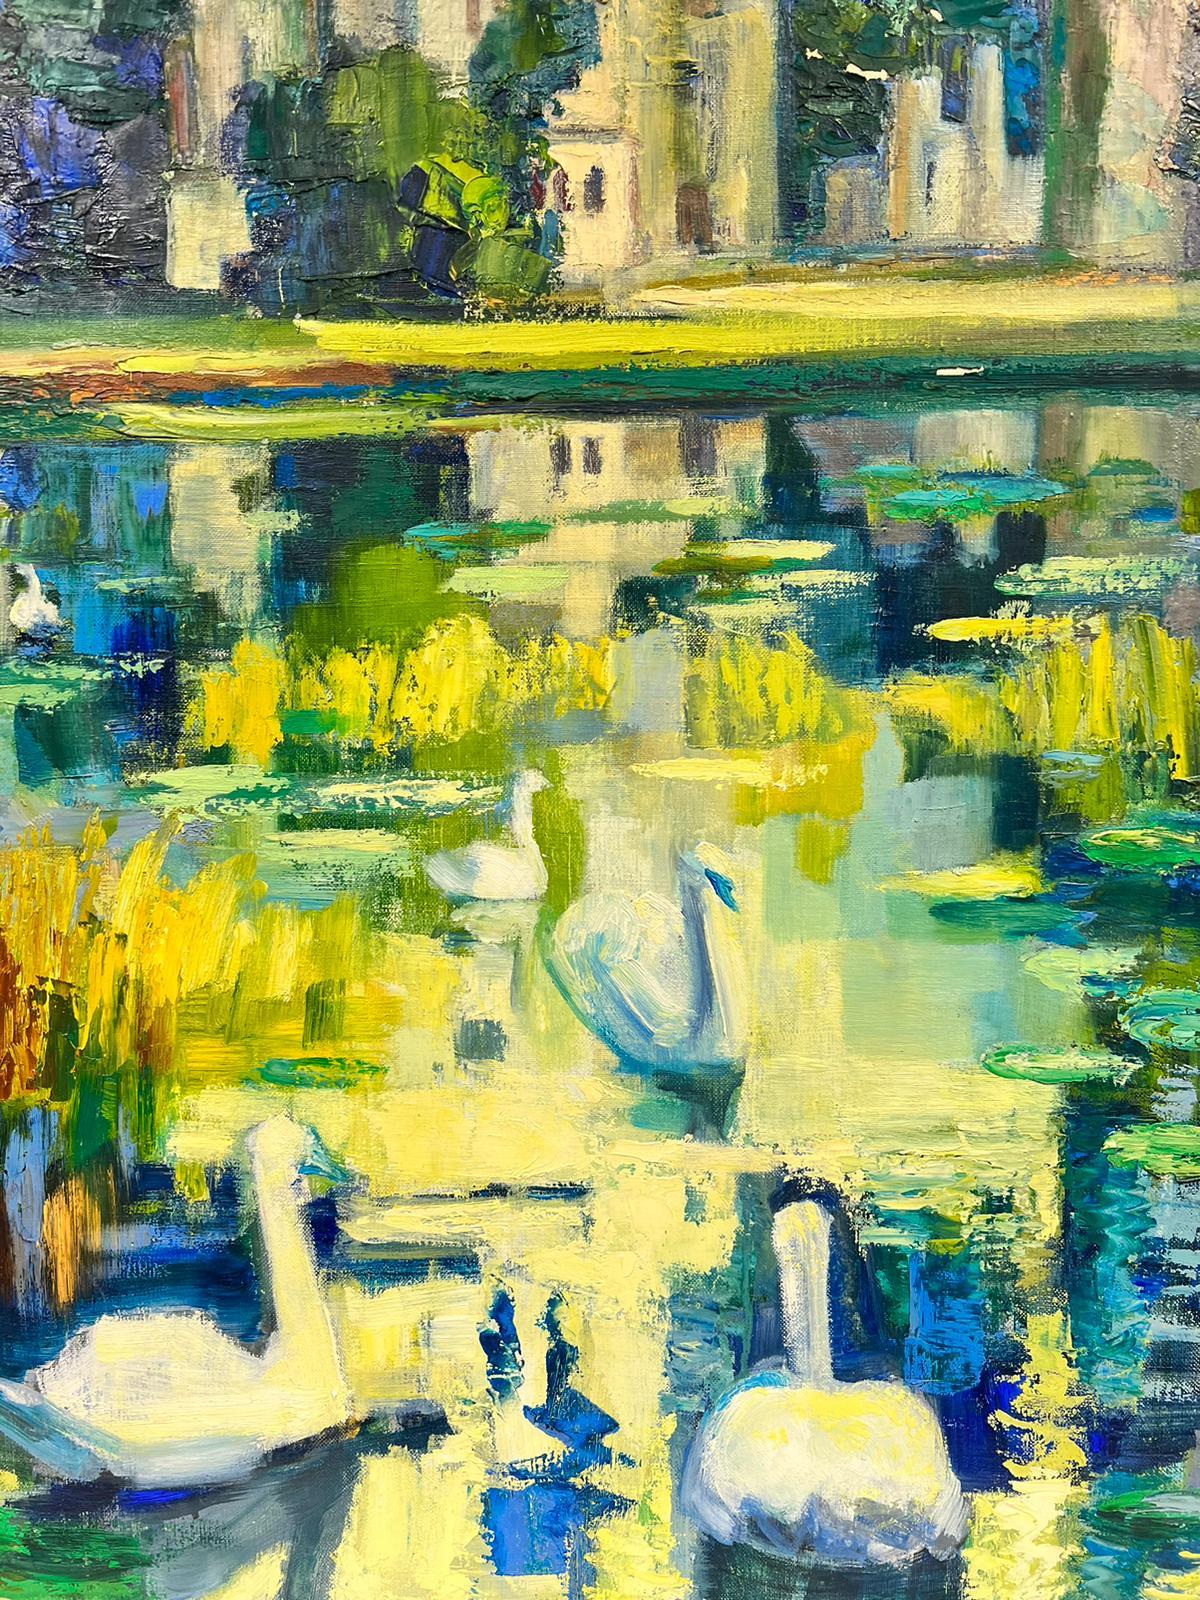 The Chateau Lake
by Josine Vignon (French 1922-2022)
signed front and back
oil painting on canvas, unframed

canvas: 29 x 24 inches

Colors: Green colors, blue, yellow and white

Very good condition though does have a few paint loss areas showing.